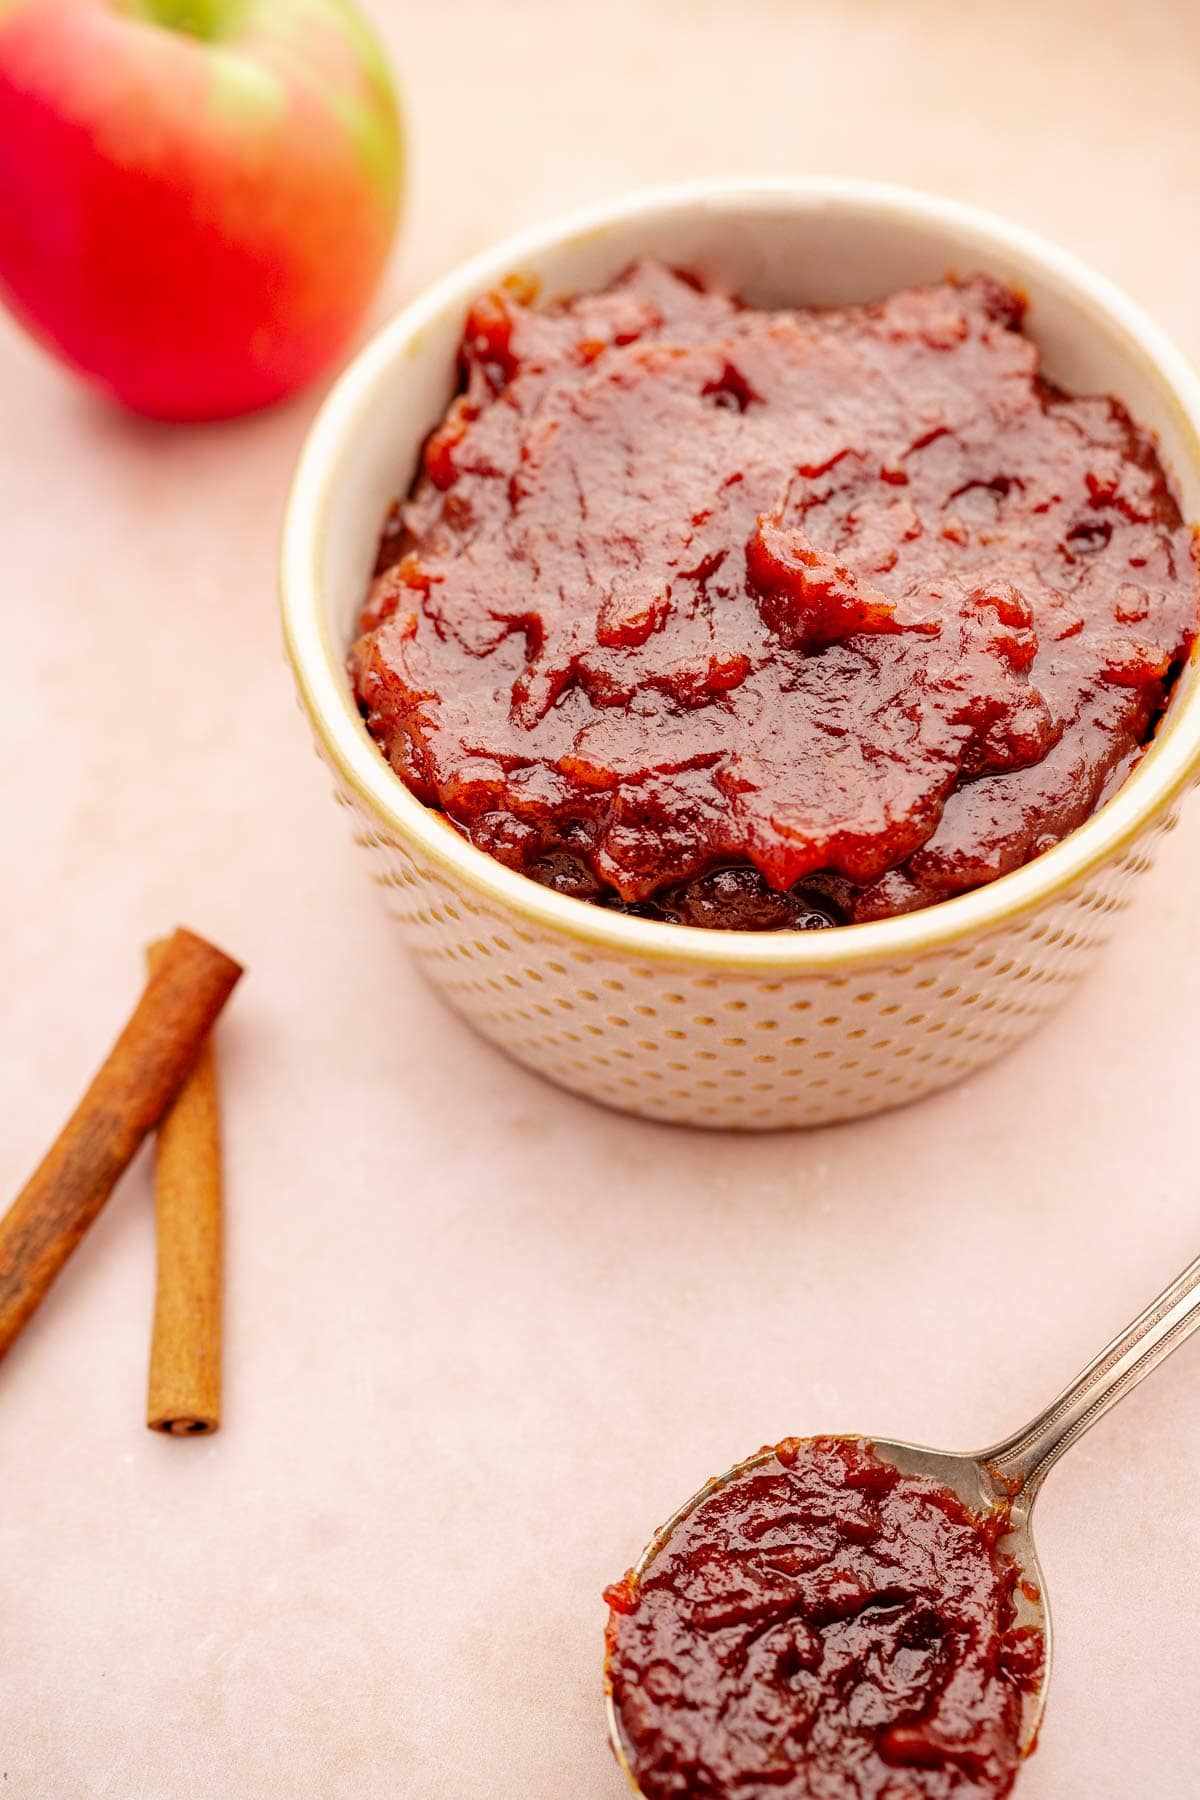 Apple sauce with cinnamon sticks simmered in a slow cooker.